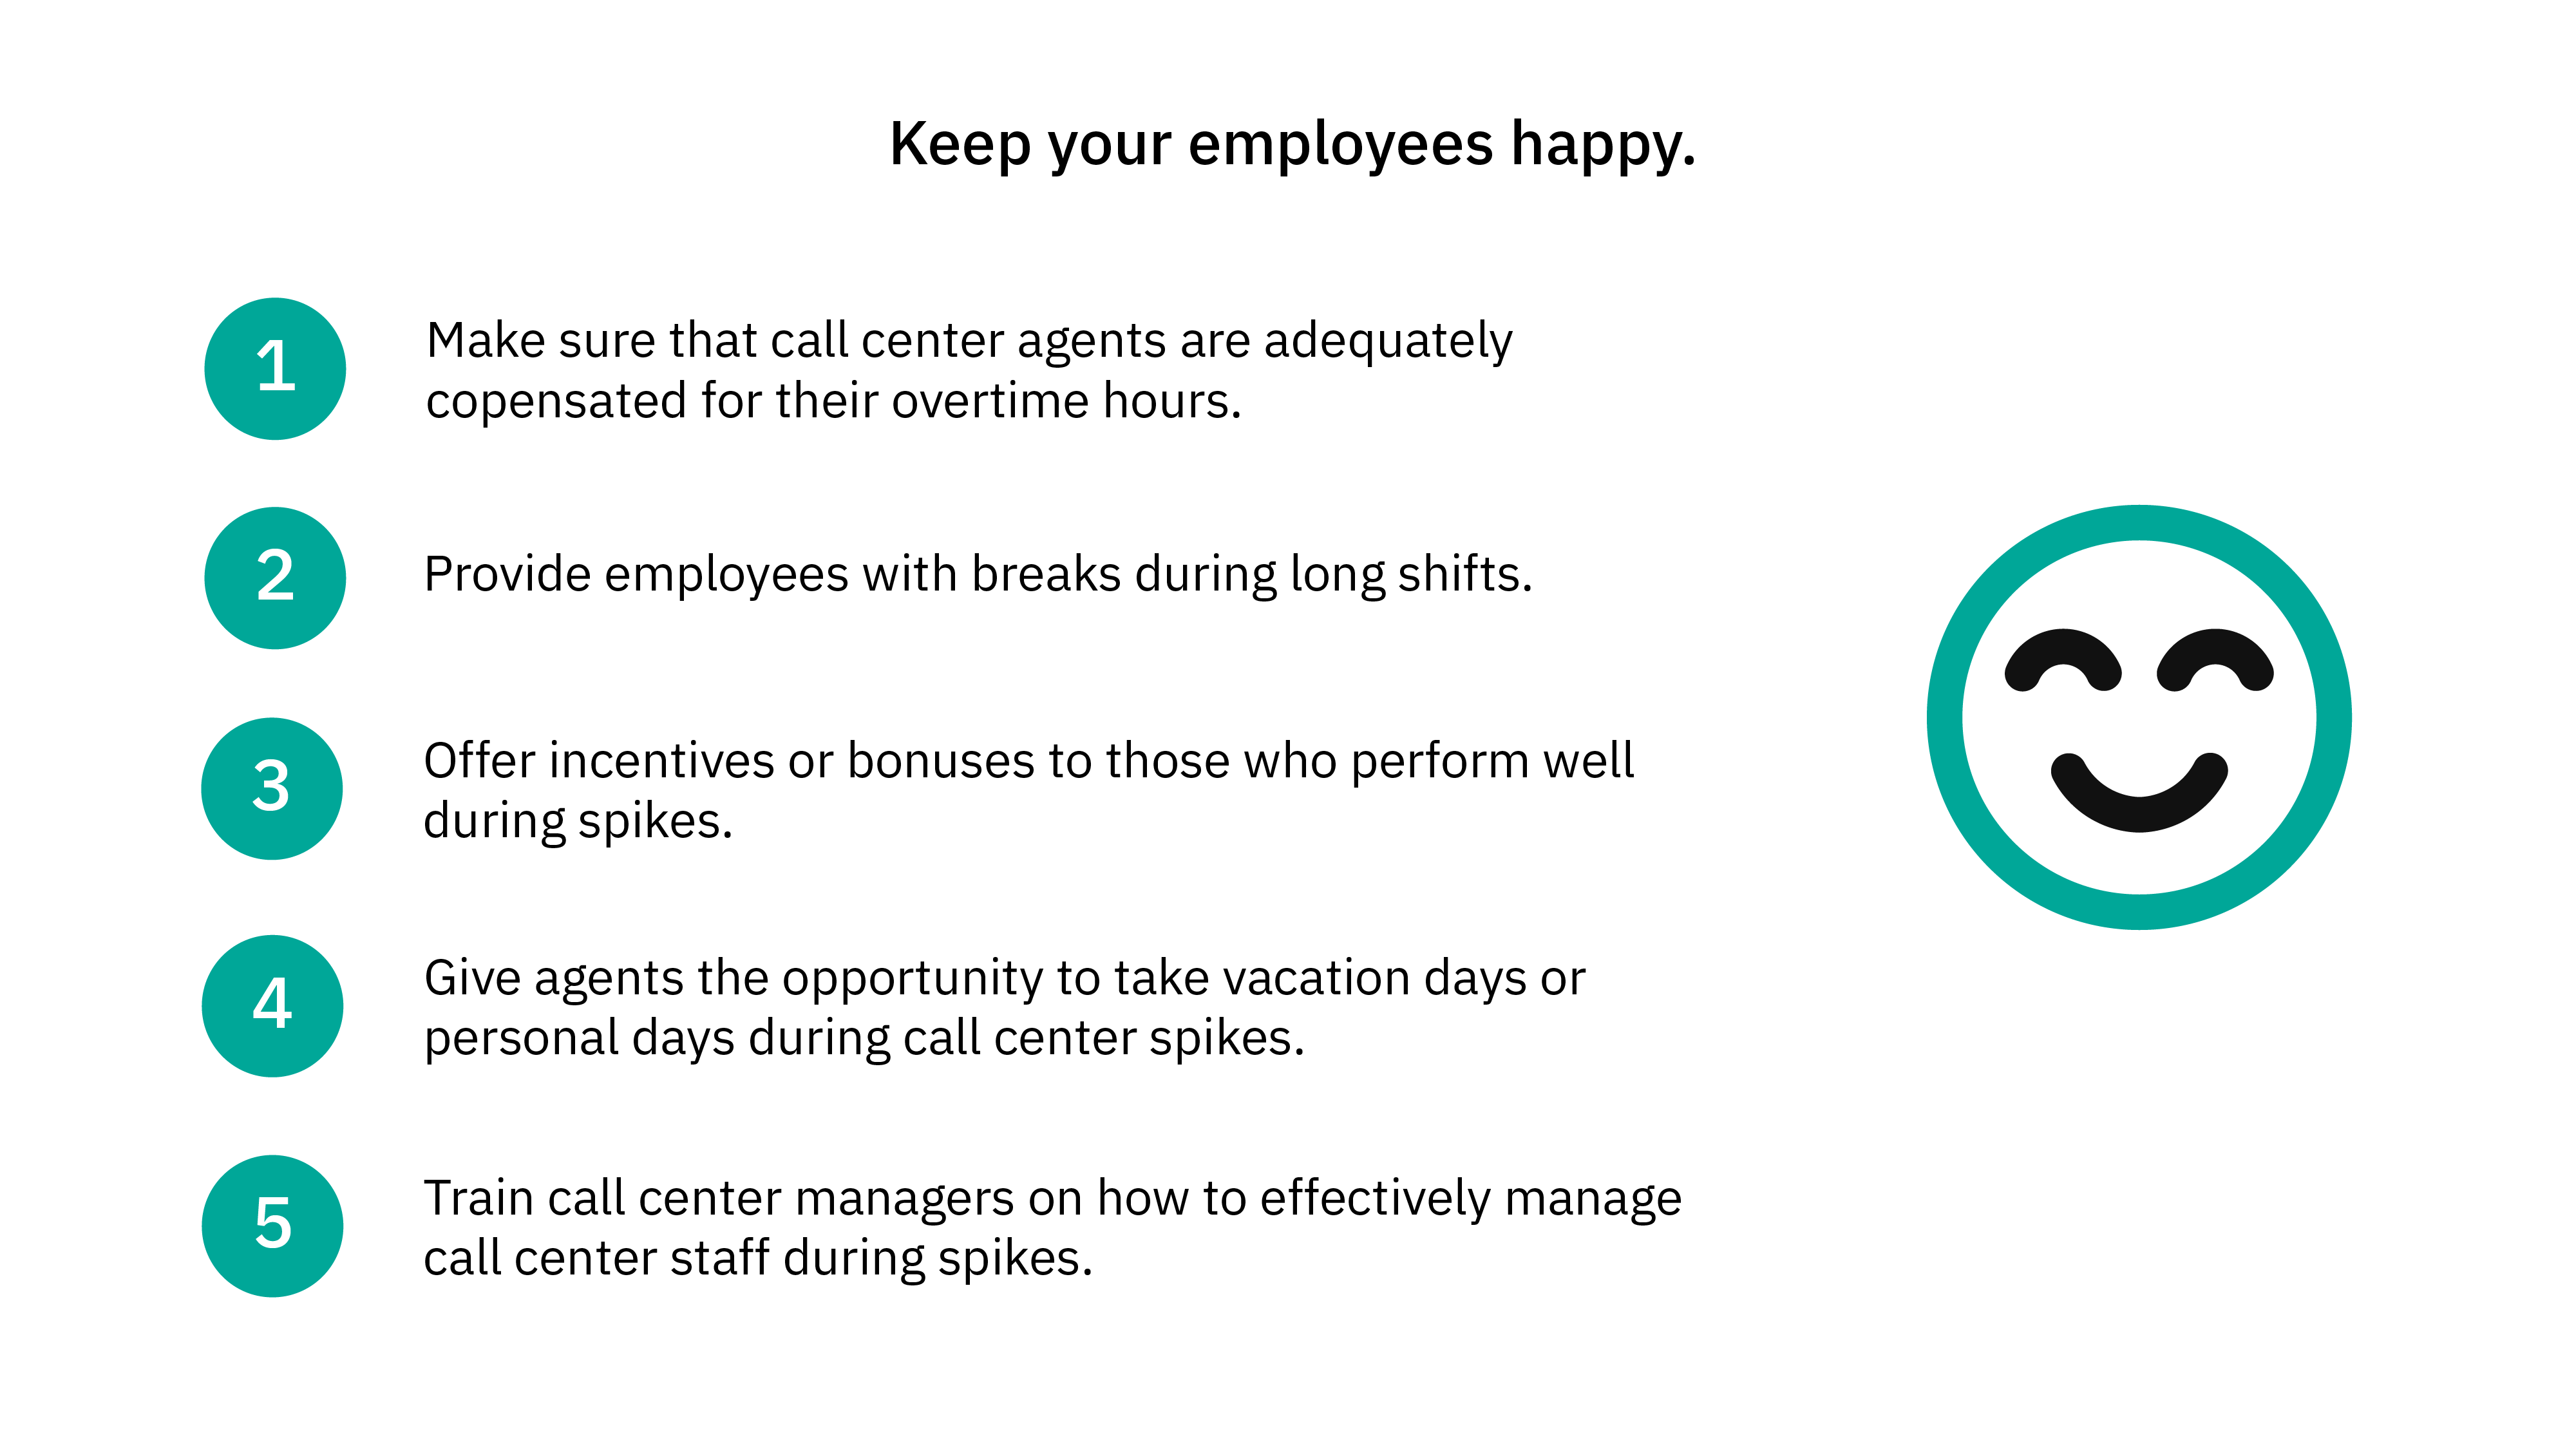 Keep your employees happy